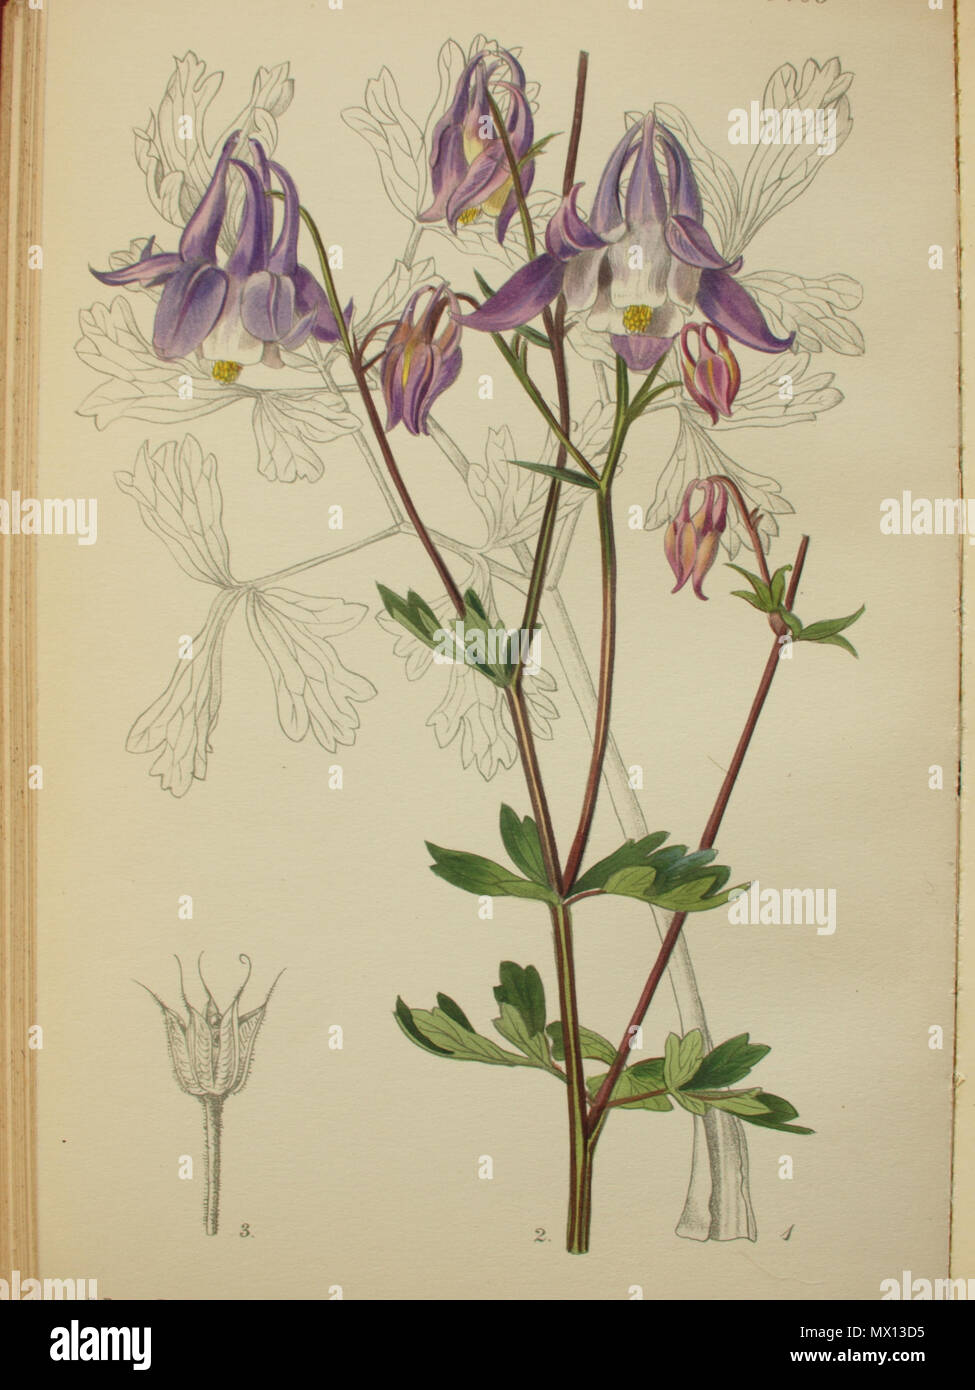 . English: Curtis's Botanical Magazine Tab 9405 Aquilegia grata from Karl Maly's sample Dobrun Bosnia 1909 Note: iconography inaccurately assumes to have depicted Aquilegia grata while Aquilegia nikolicii is correct. Erroneously Turrill was sent seeds by Karl Maly tentatively assuming they belong to Aquilegia grata. In reality he depicted Aquilegia nikolicii Niketic & Cikovac. Further reading: Marjan Niketić, Pavle Cikovac, Vladimir Stevanović 2013: Taxonomic and nomenclature notes on Balkan columbines (Aquilegia L., Ranunculaceae). In: Bulletin of the Natural History Museum Belgrade, 6: 33-42 Stock Photo